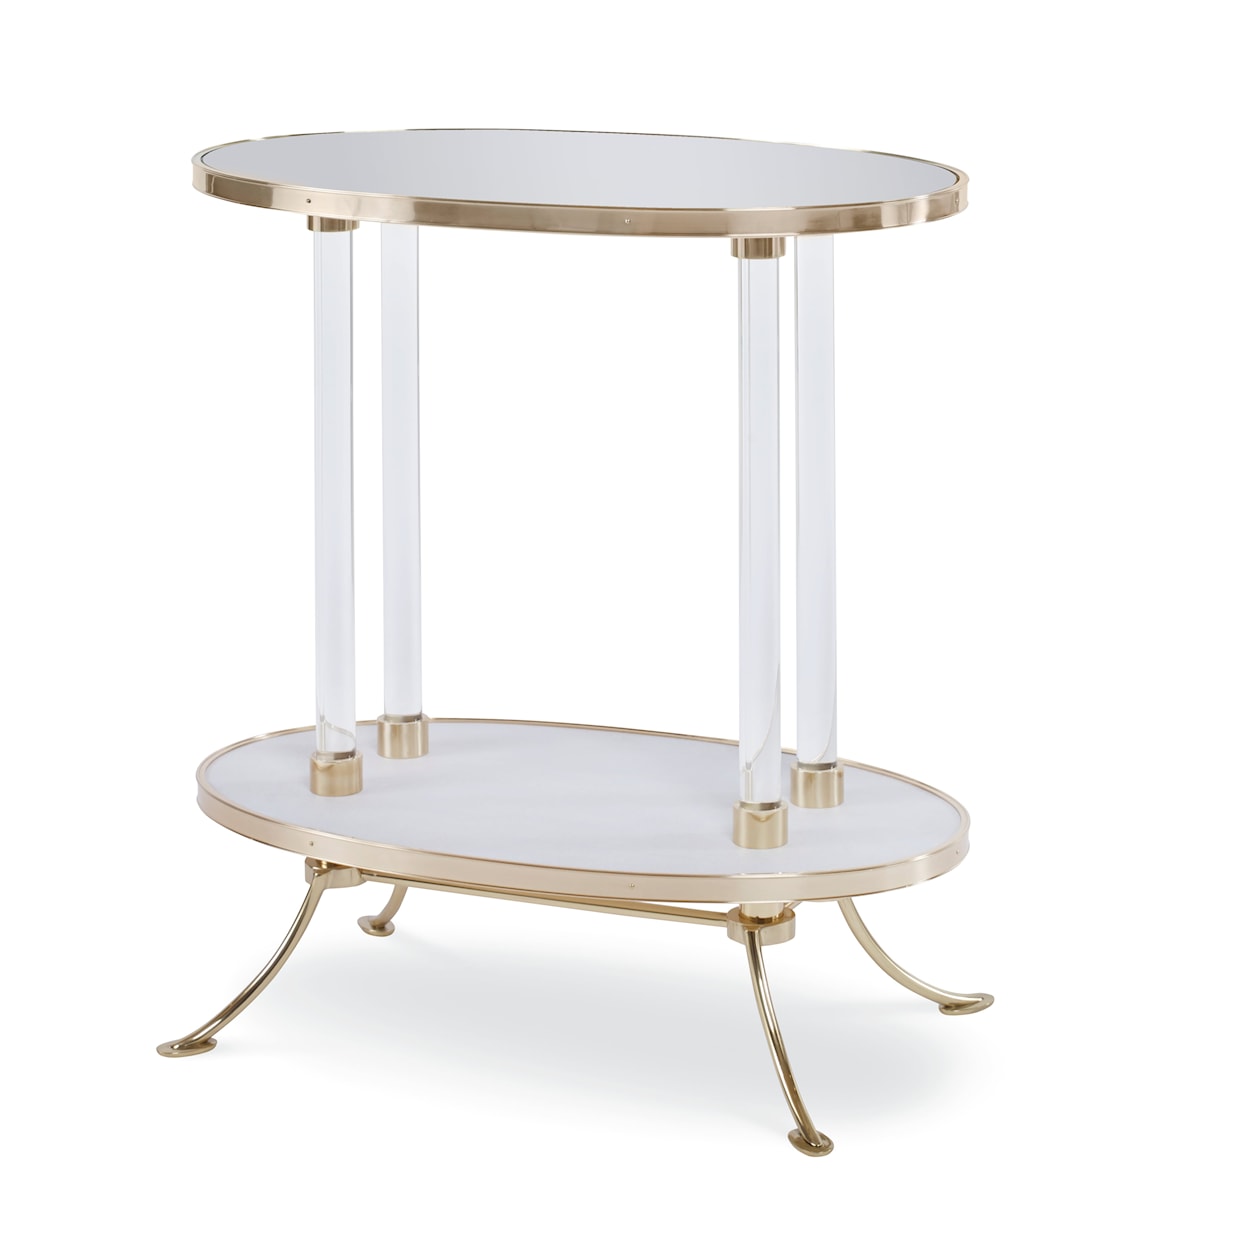 Century Windsor Smith Juliet Cigarette Table With Plain Mirror